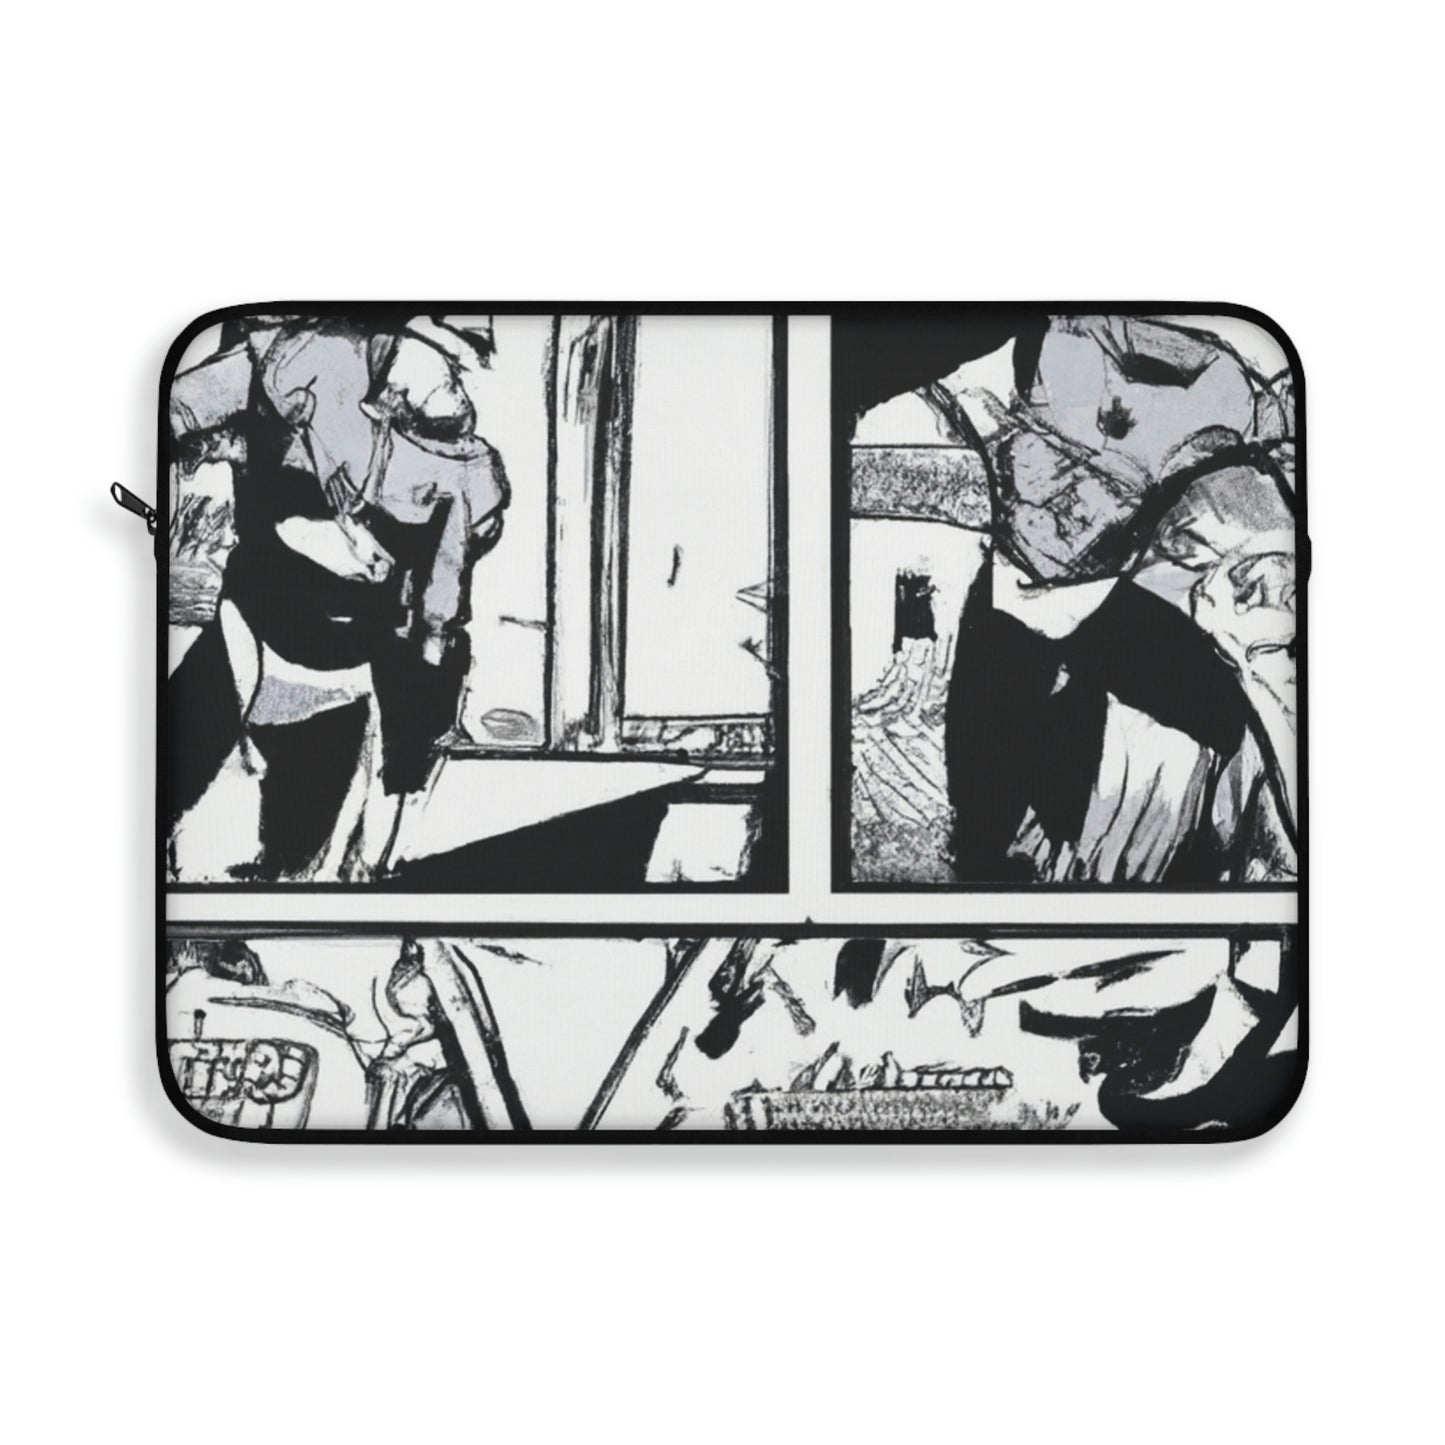 Danny the Digger - Comic Book Collector Laptop Computer Sleeve Storage Case Bag